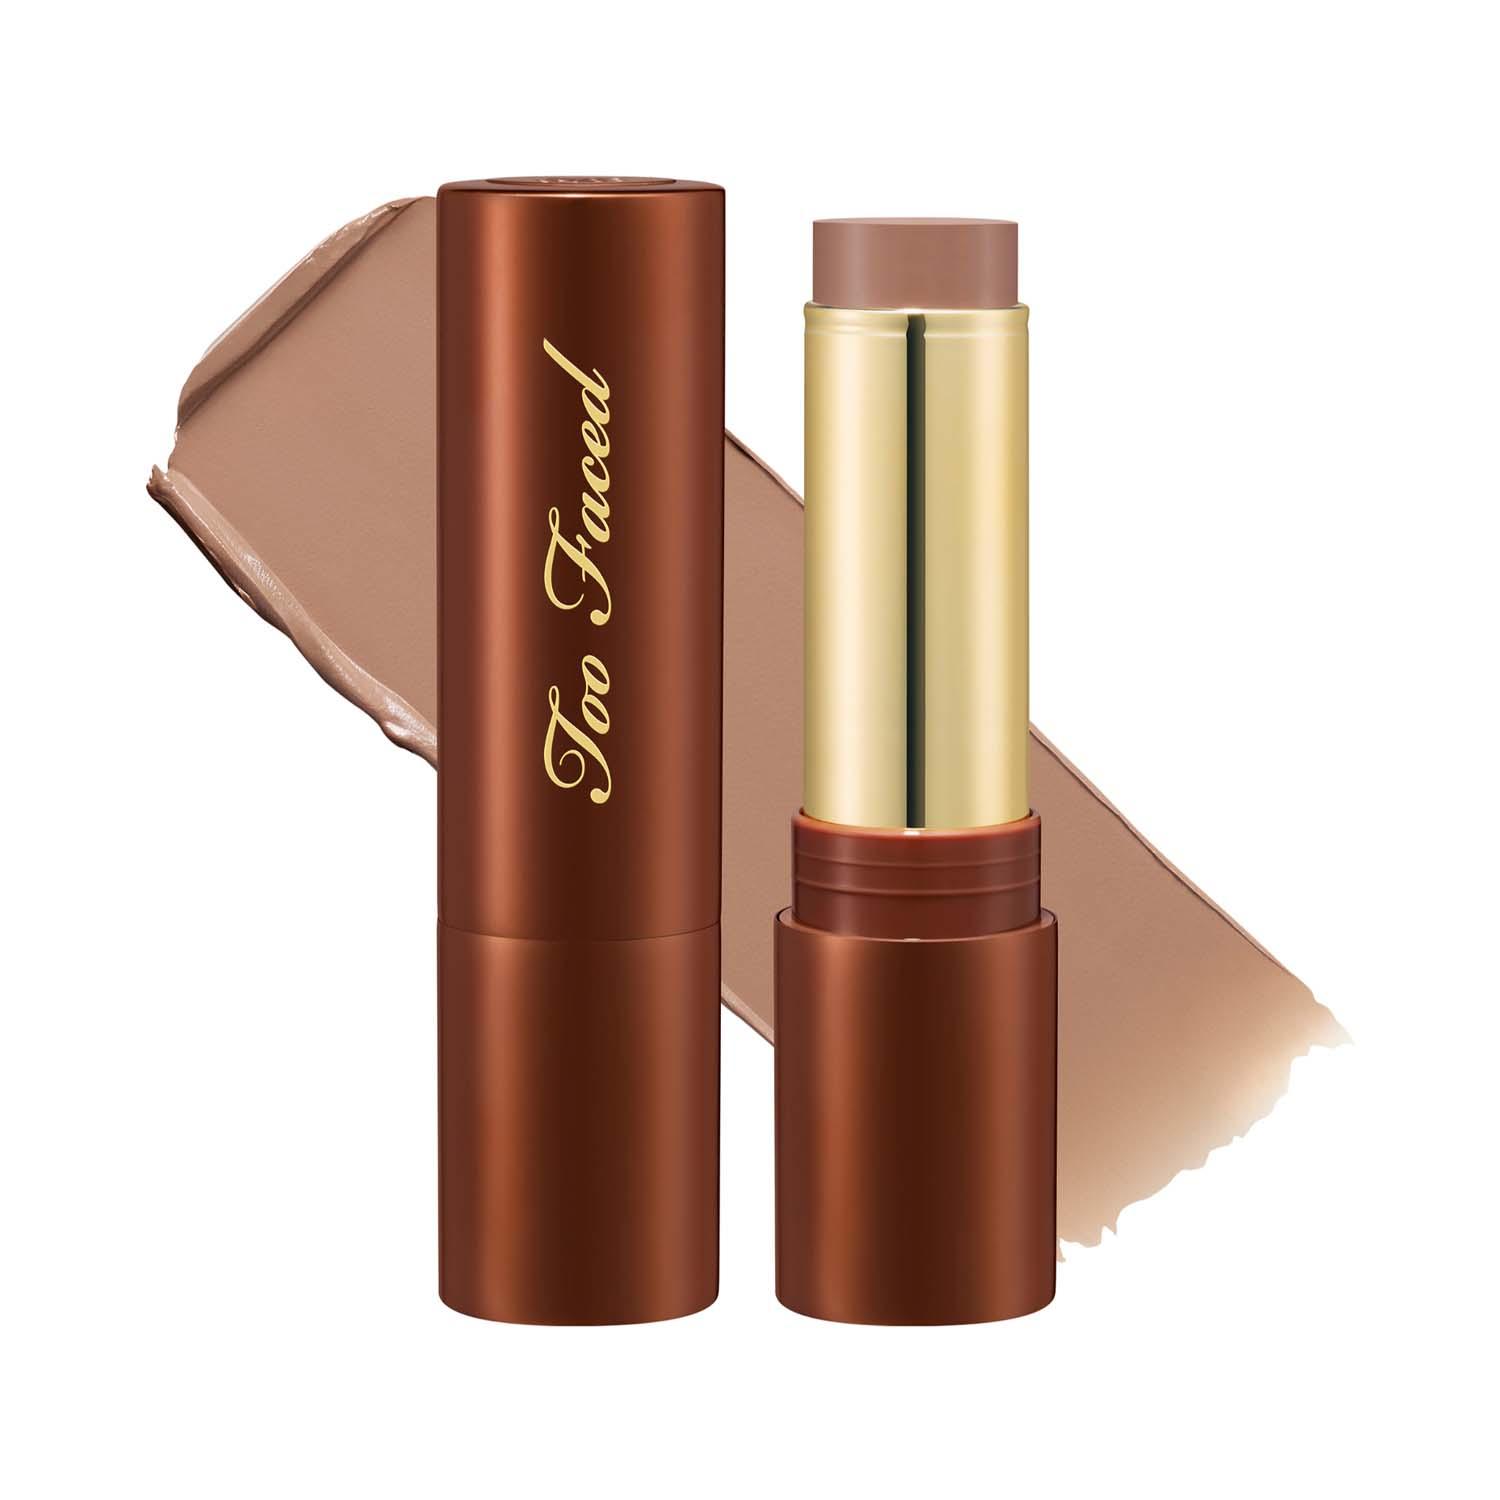 Too Faced | Too Faced Chocolate Soleil Multi-Use Creamy Bronzing & Sculpting Stick - Chocolate Mousse (8 g)